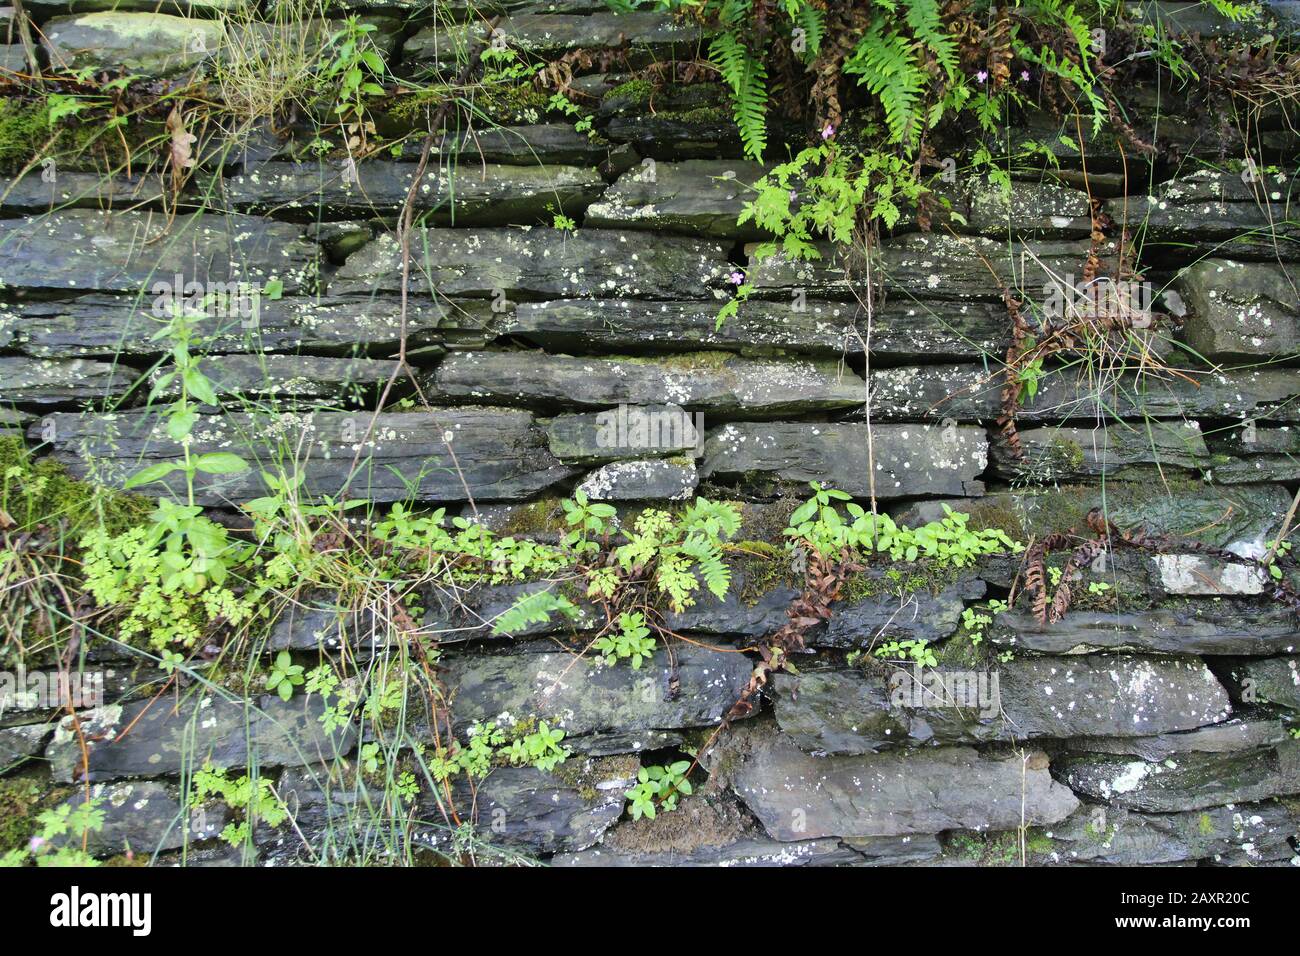 Dry stone wall  07/07/20175  Wales United Kingdom.  A dry stone wall Hedgerow. Dry stone structures are stable due to a unique construction method, Stock Photo